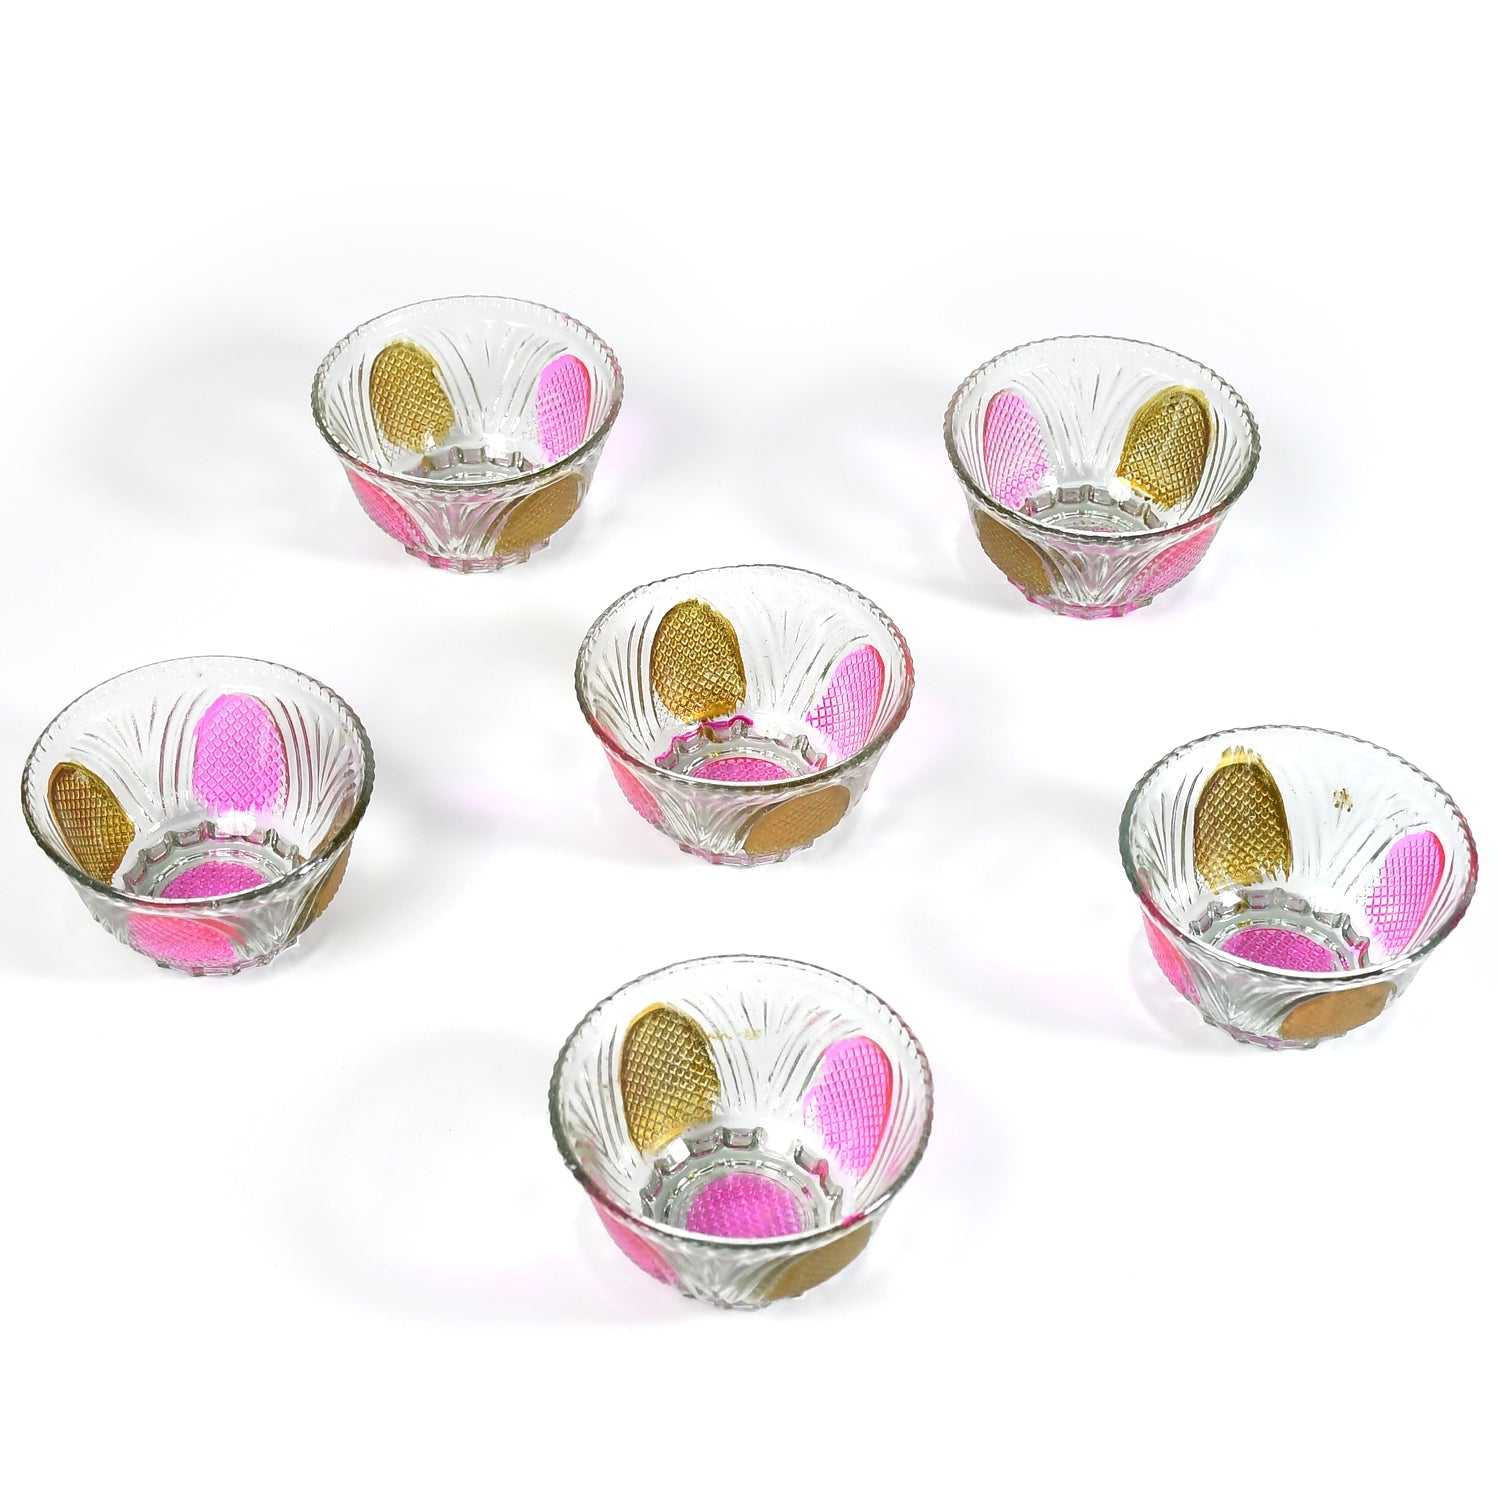 7136 Glass Bowls for Kitchen Prep, Dessert, Dips, and Candy Dishes, Cake, Snack Bowl or Nut Bowls, and Microwave Safe Clear Glass Bowls for Mixing, Storing ( 6 pcs ) DeoDap